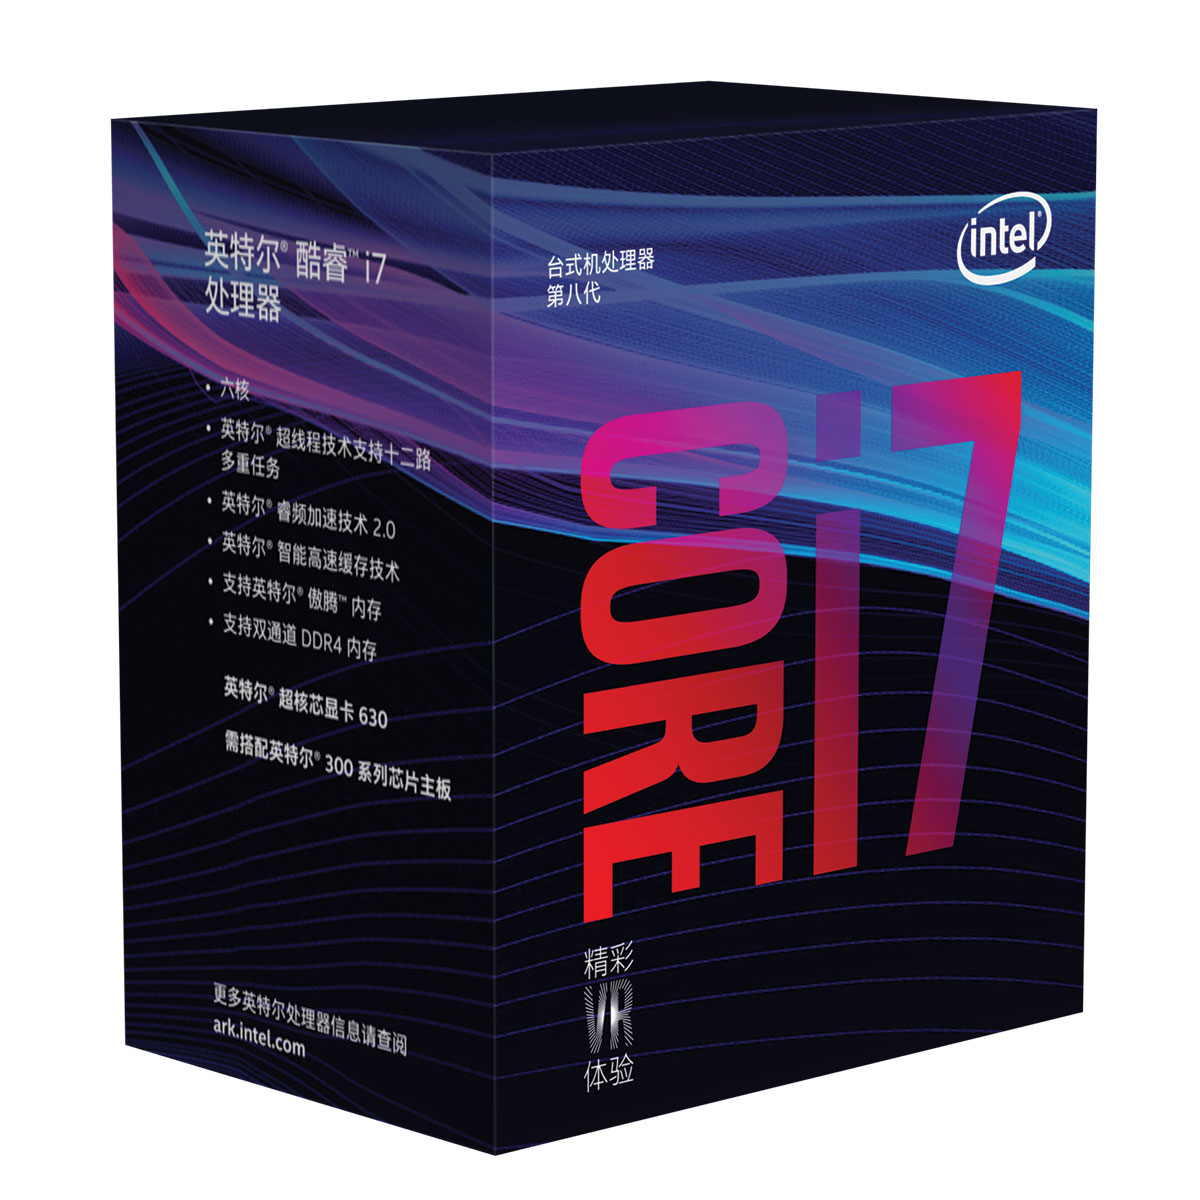 Core i7-8700 (3.2 GHz)